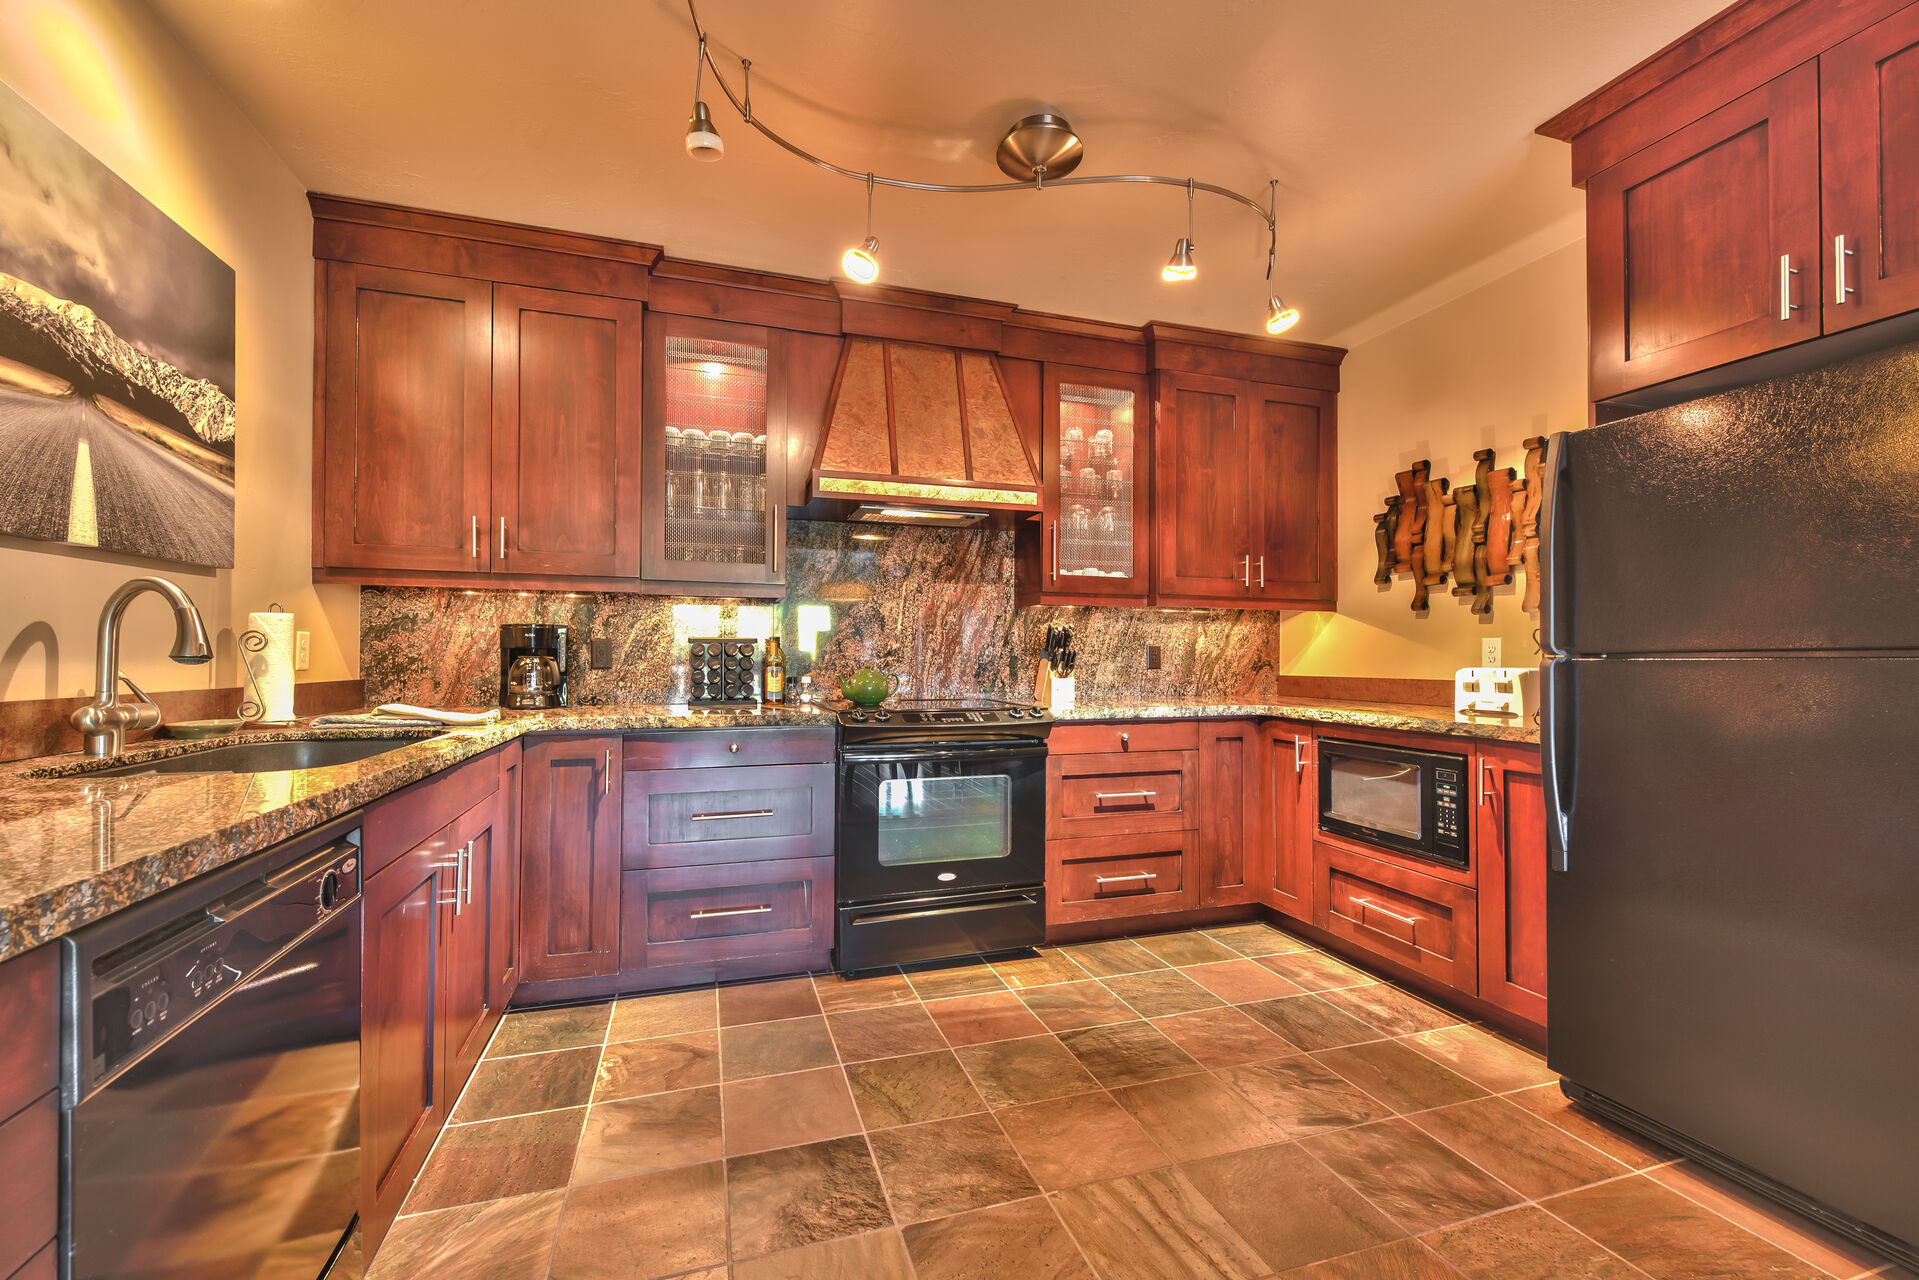 Kitchen with granite counter tops and new appliances